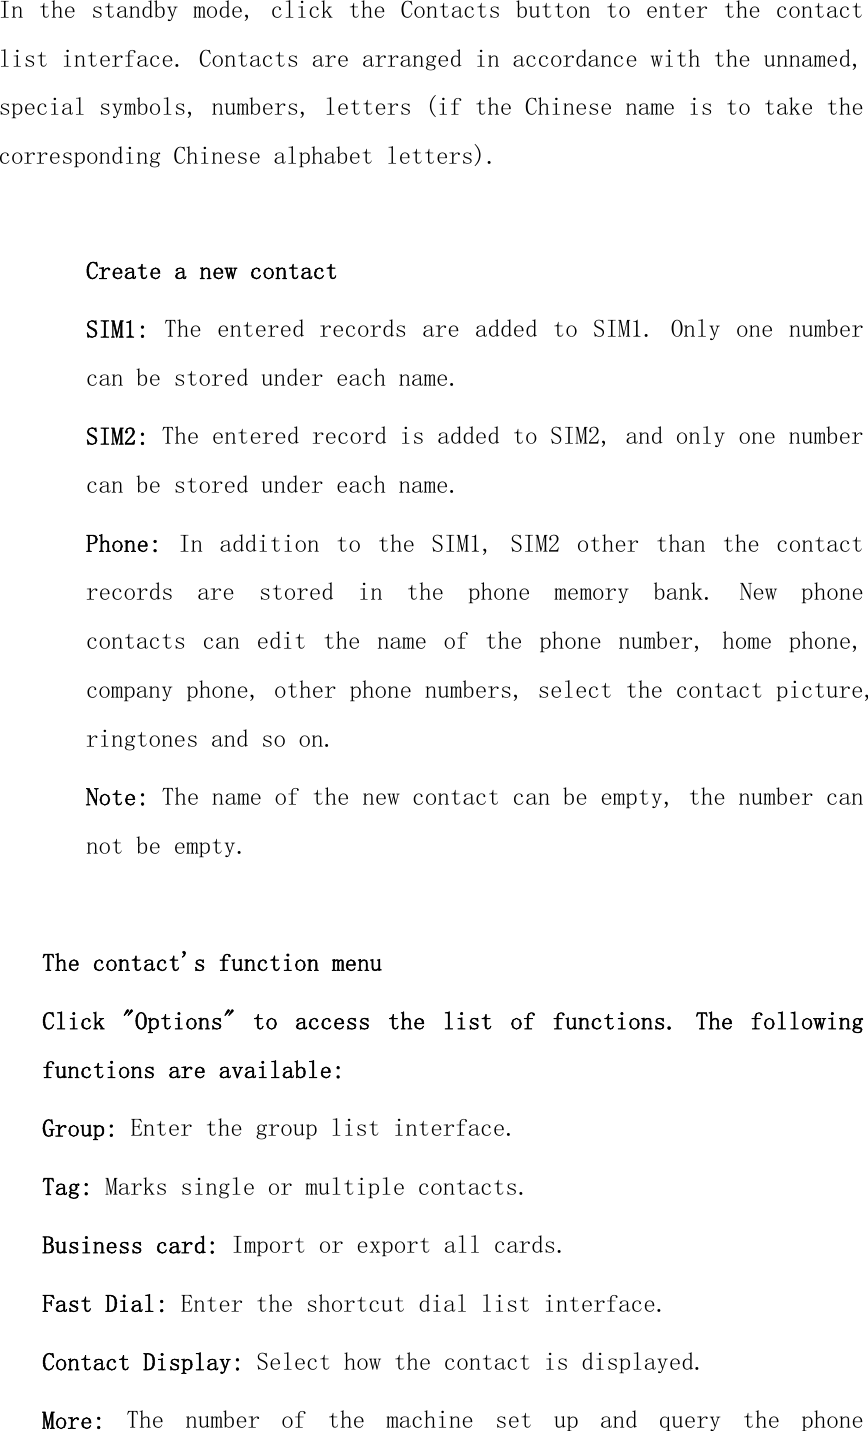 In the standby mode, click the Contacts button to enter the  contact list interface. Contacts are arranged in accordance with the unnamed, special symbols, numbers, letters (if the Chinese name is to take the corresponding Chinese alphabet letters).  Create a new contact SIM1: The entered records are  added to  SIM1. Only one  number can be stored under each name. SIM2: The entered record is added to SIM2, and only one number can be stored under each name. Phone:  In  addition  to  the  SIM1,  SIM2  other  than  the  contact records  are  stored  in  the  phone  memory  bank.  New  phone contacts  can  edit  the  name  of  the  phone  number,  home  phone, company phone, other phone numbers, select the contact picture, ringtones and so on. Note: The name of the new contact can be empty, the number can not be empty.  The contact&apos;s function menu Click  &quot;Options&quot;  to  access  the  list  of  functions.  The  following functions are available: Group: Enter the group list interface. Tag: Marks single or multiple contacts. Business card: Import or export all cards. Fast Dial: Enter the shortcut dial list interface. Contact Display: Select how the contact is displayed. More:  The  number  of  the  machine  set  up  and  query  the  phone 